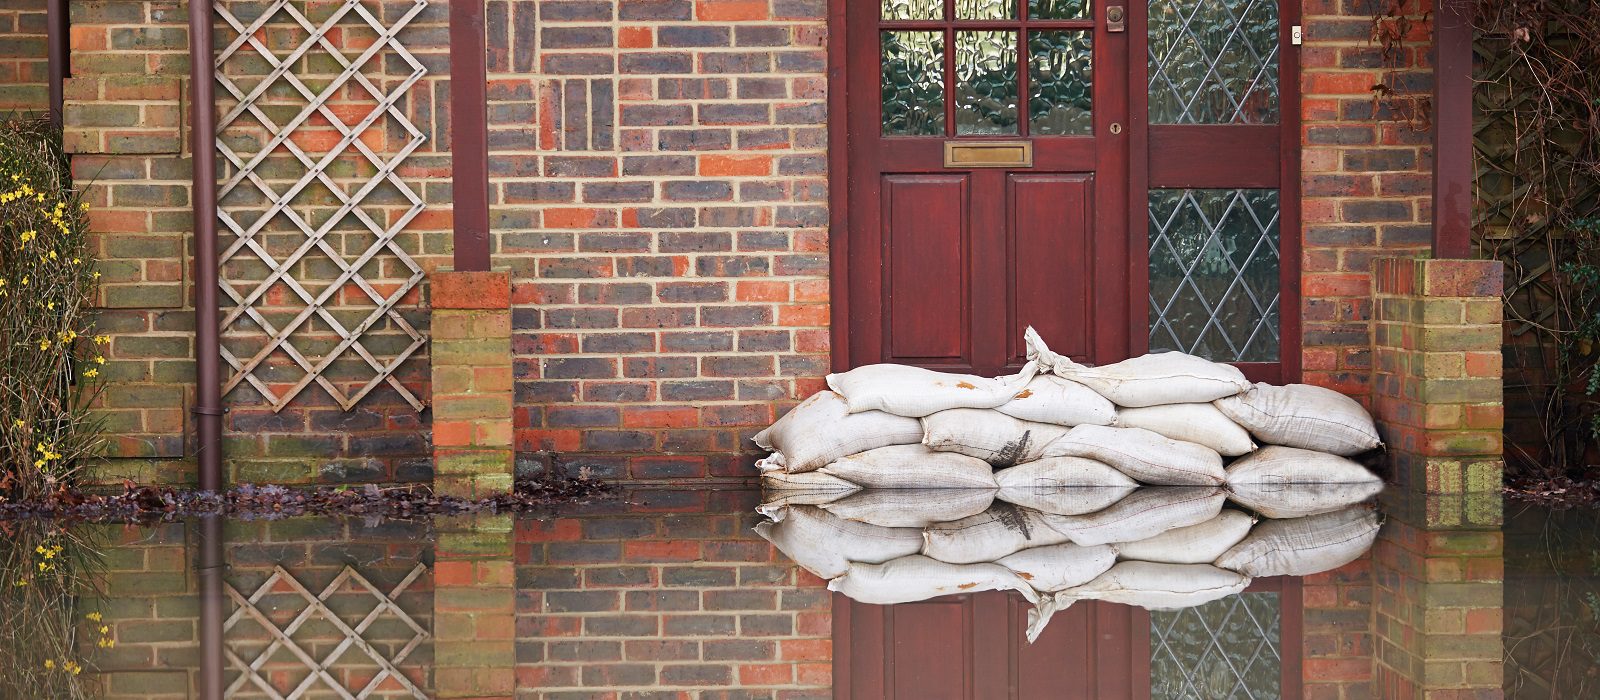 Sandbags Outside Front Door Of Flooded House